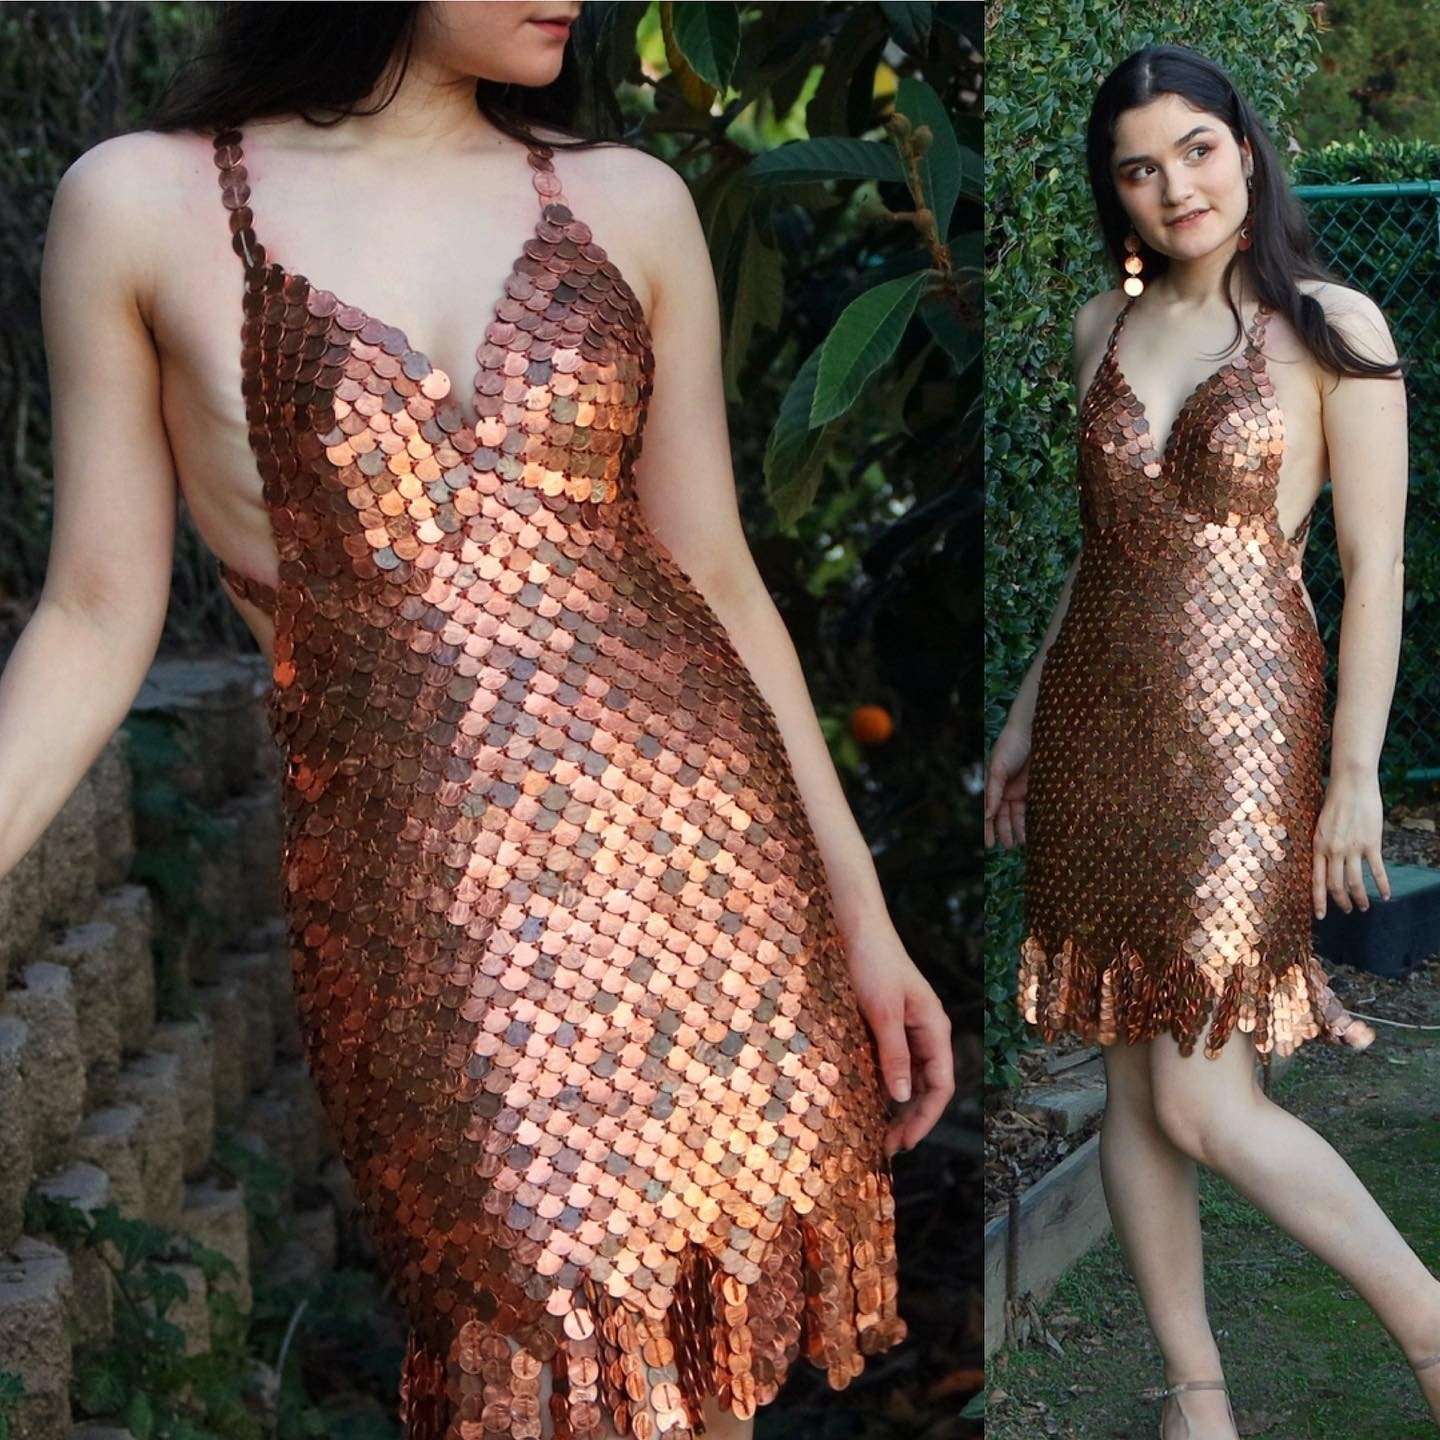 Vintage-Inspired Cocktail Dress Is Handmade From Over 2000 Pennies